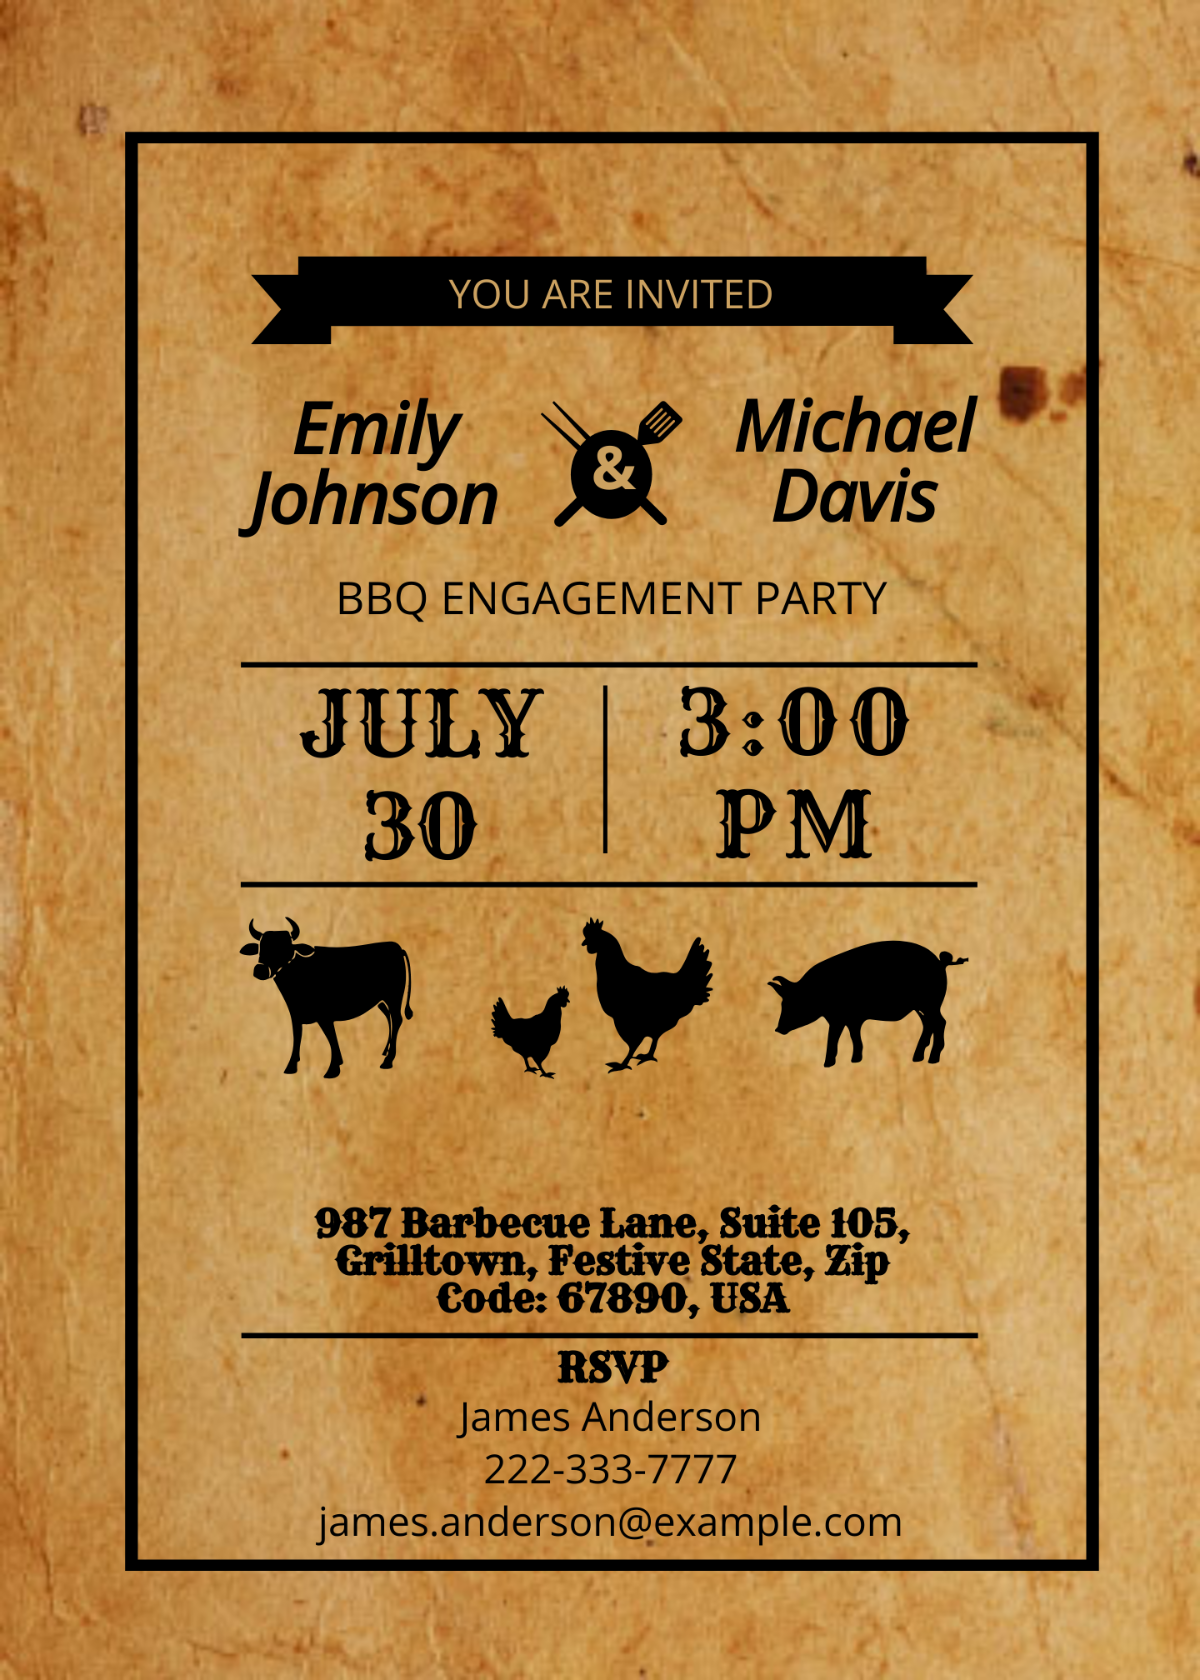 BBQ Engagement Party Invitation Card